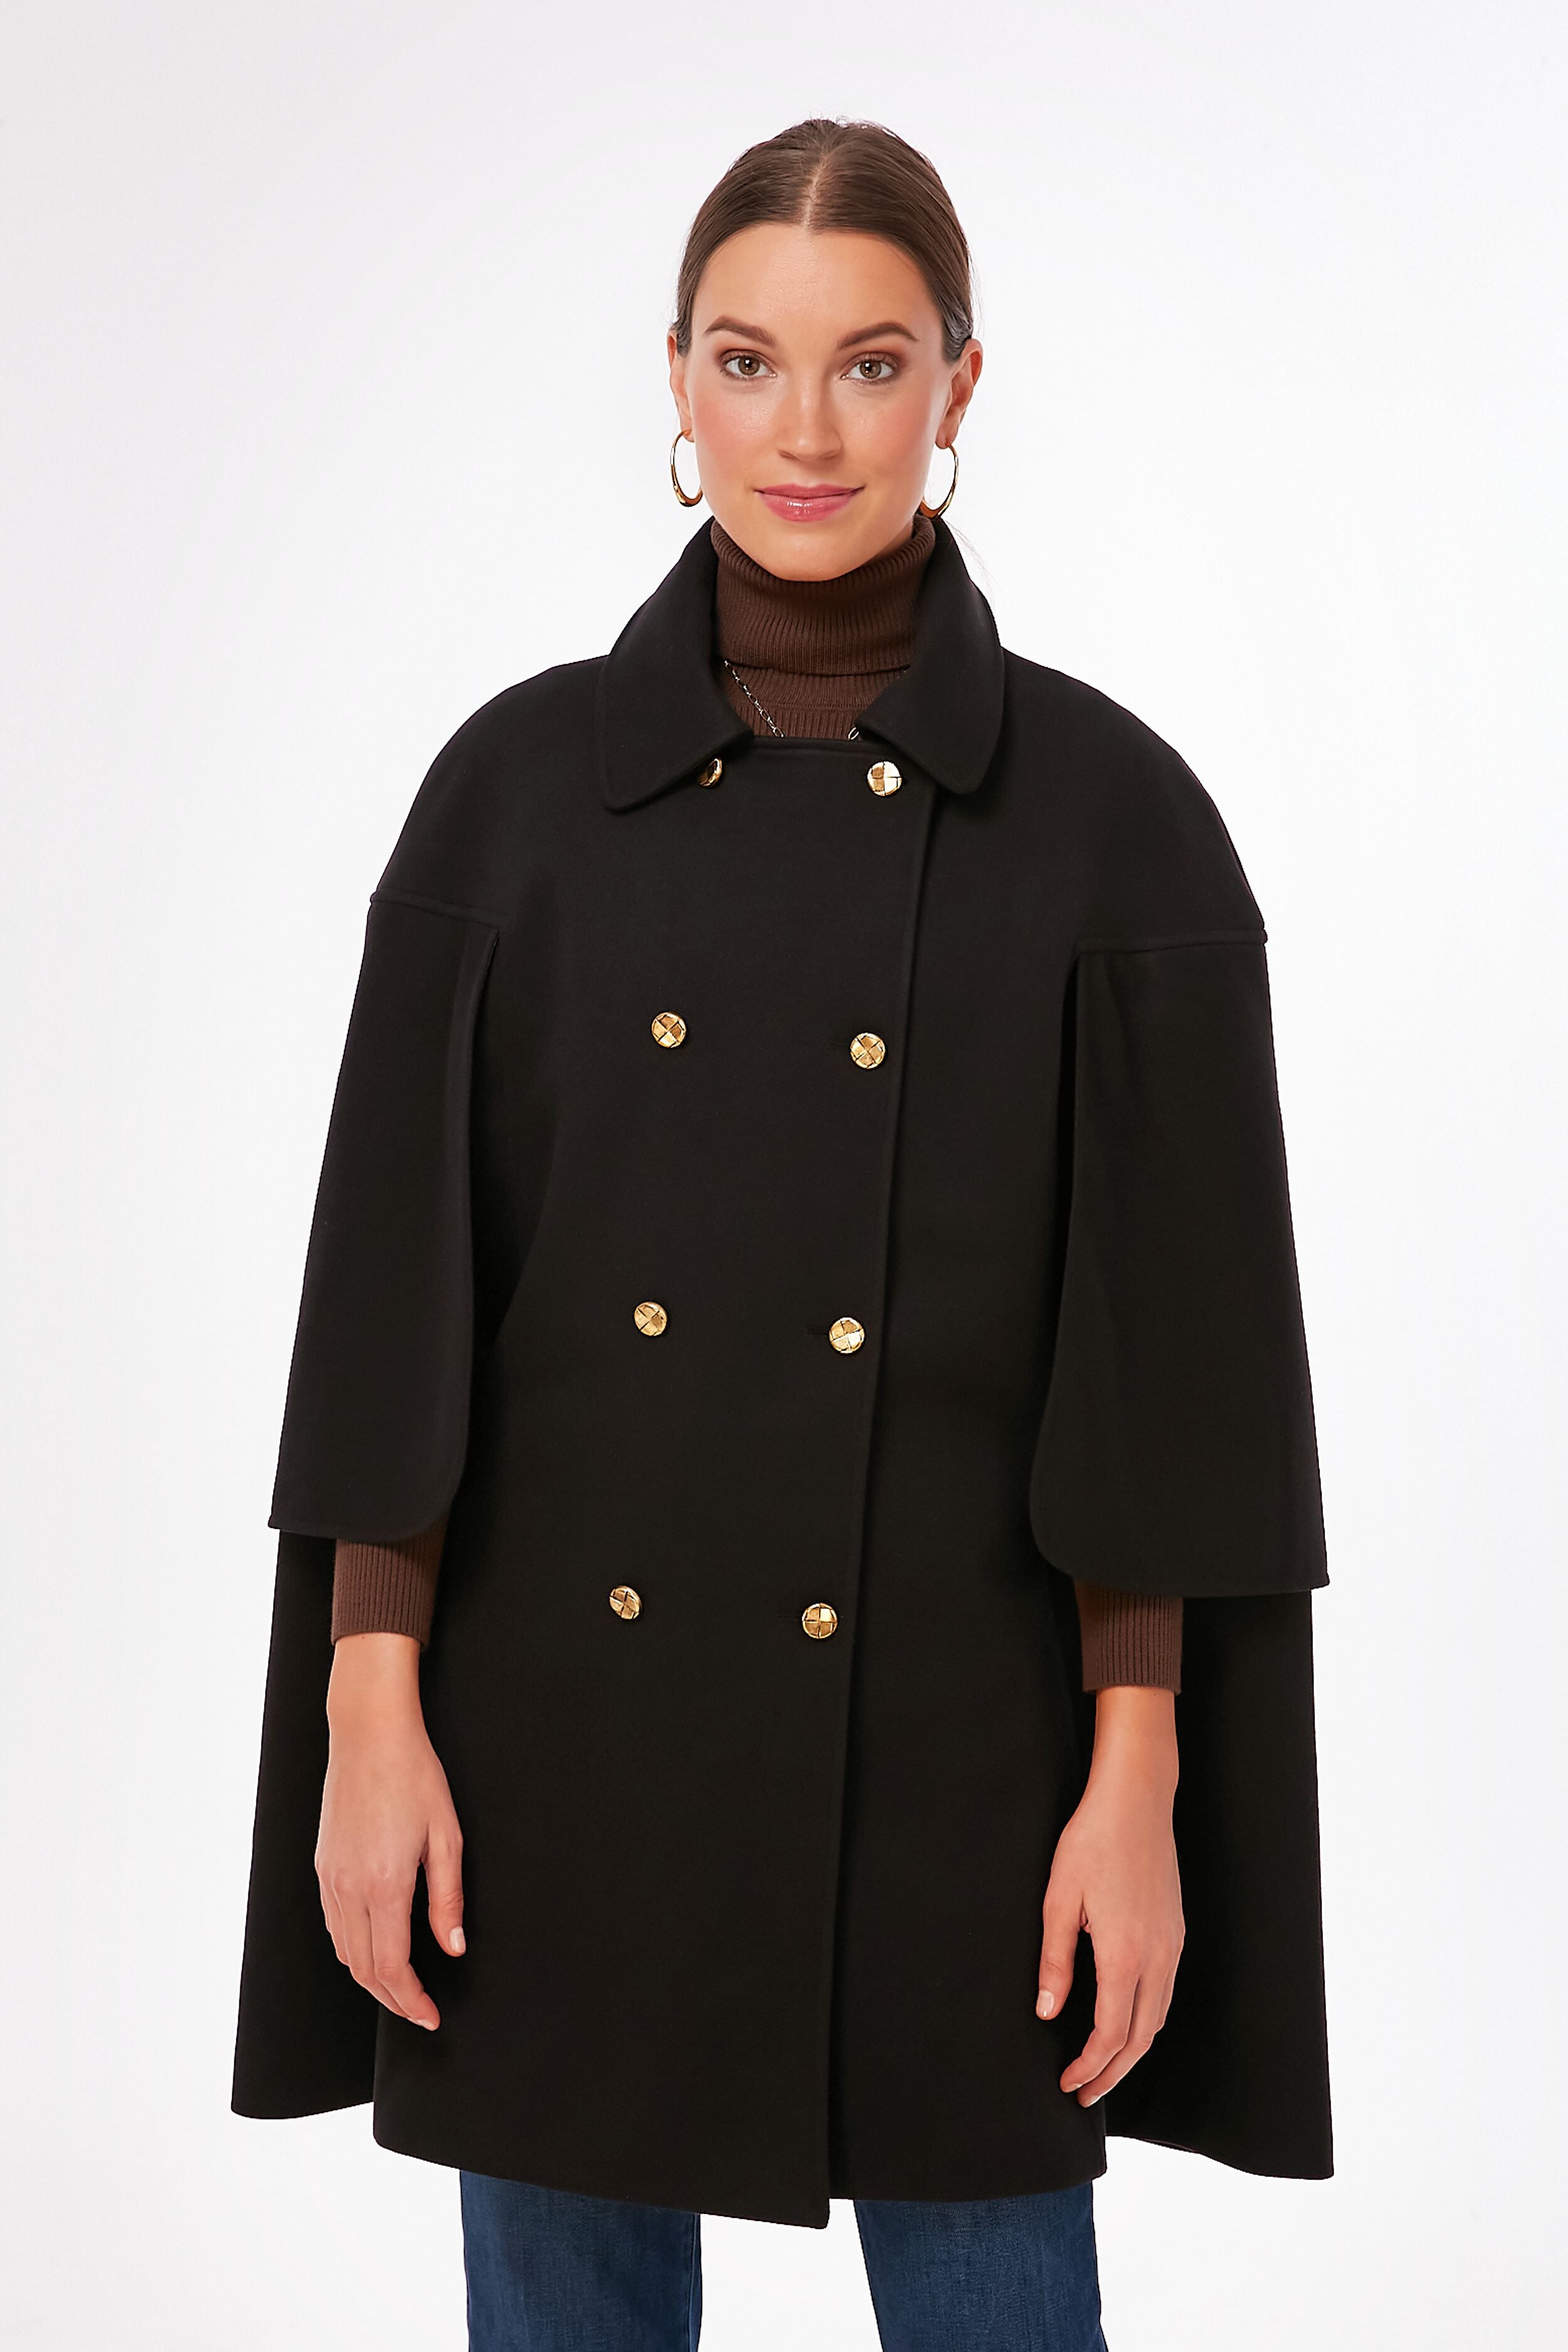 ALA?A Edition Trench Coat Cape in Black